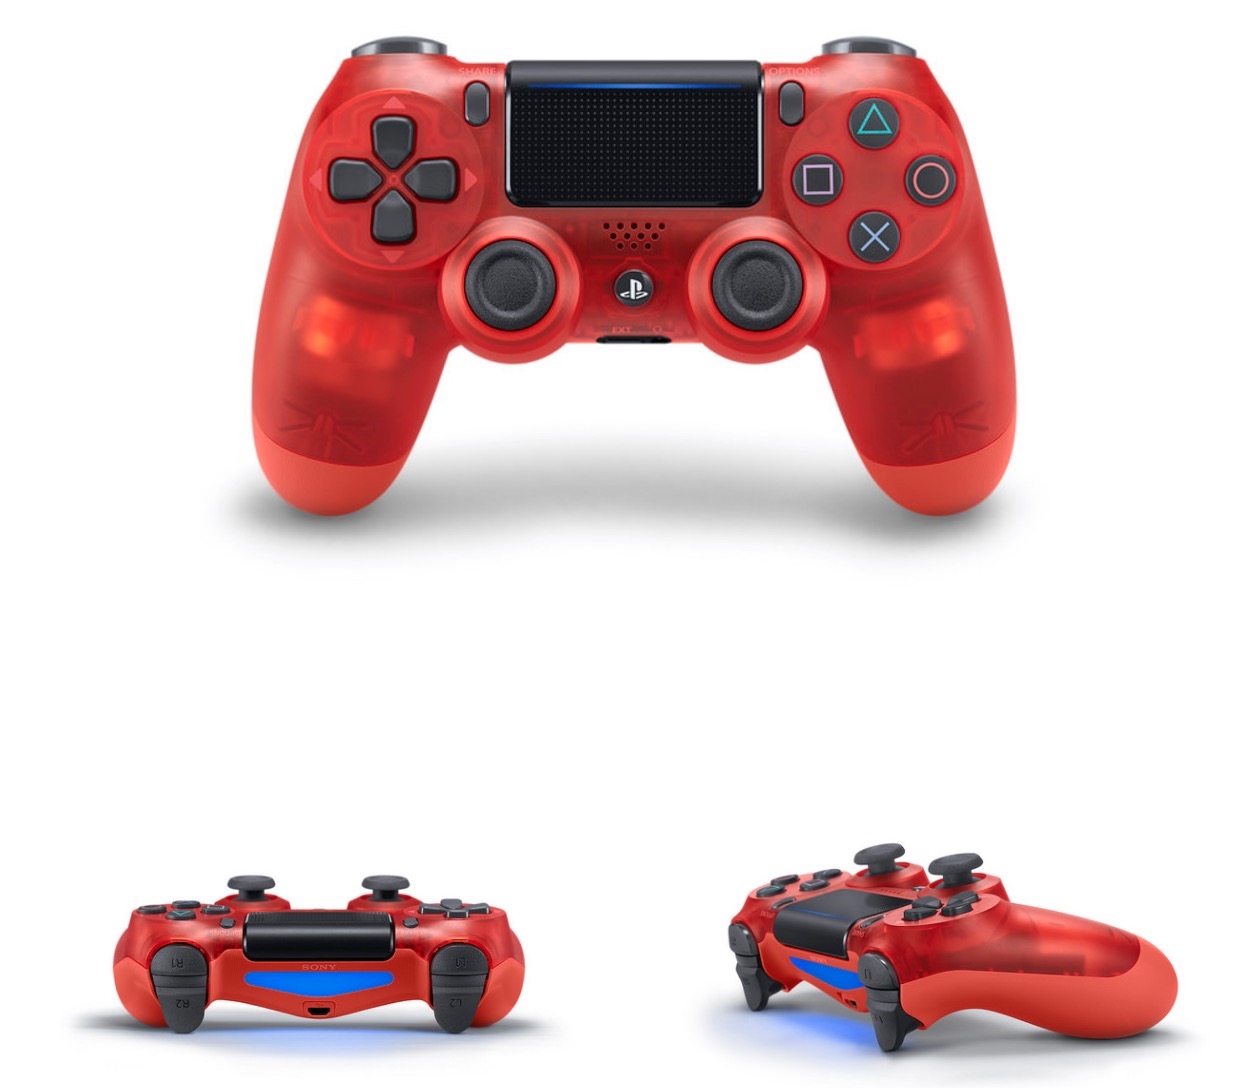 Sony’s new ‘Crystal’ DualShock 4s are red, white and blue | DeviceDaily.com